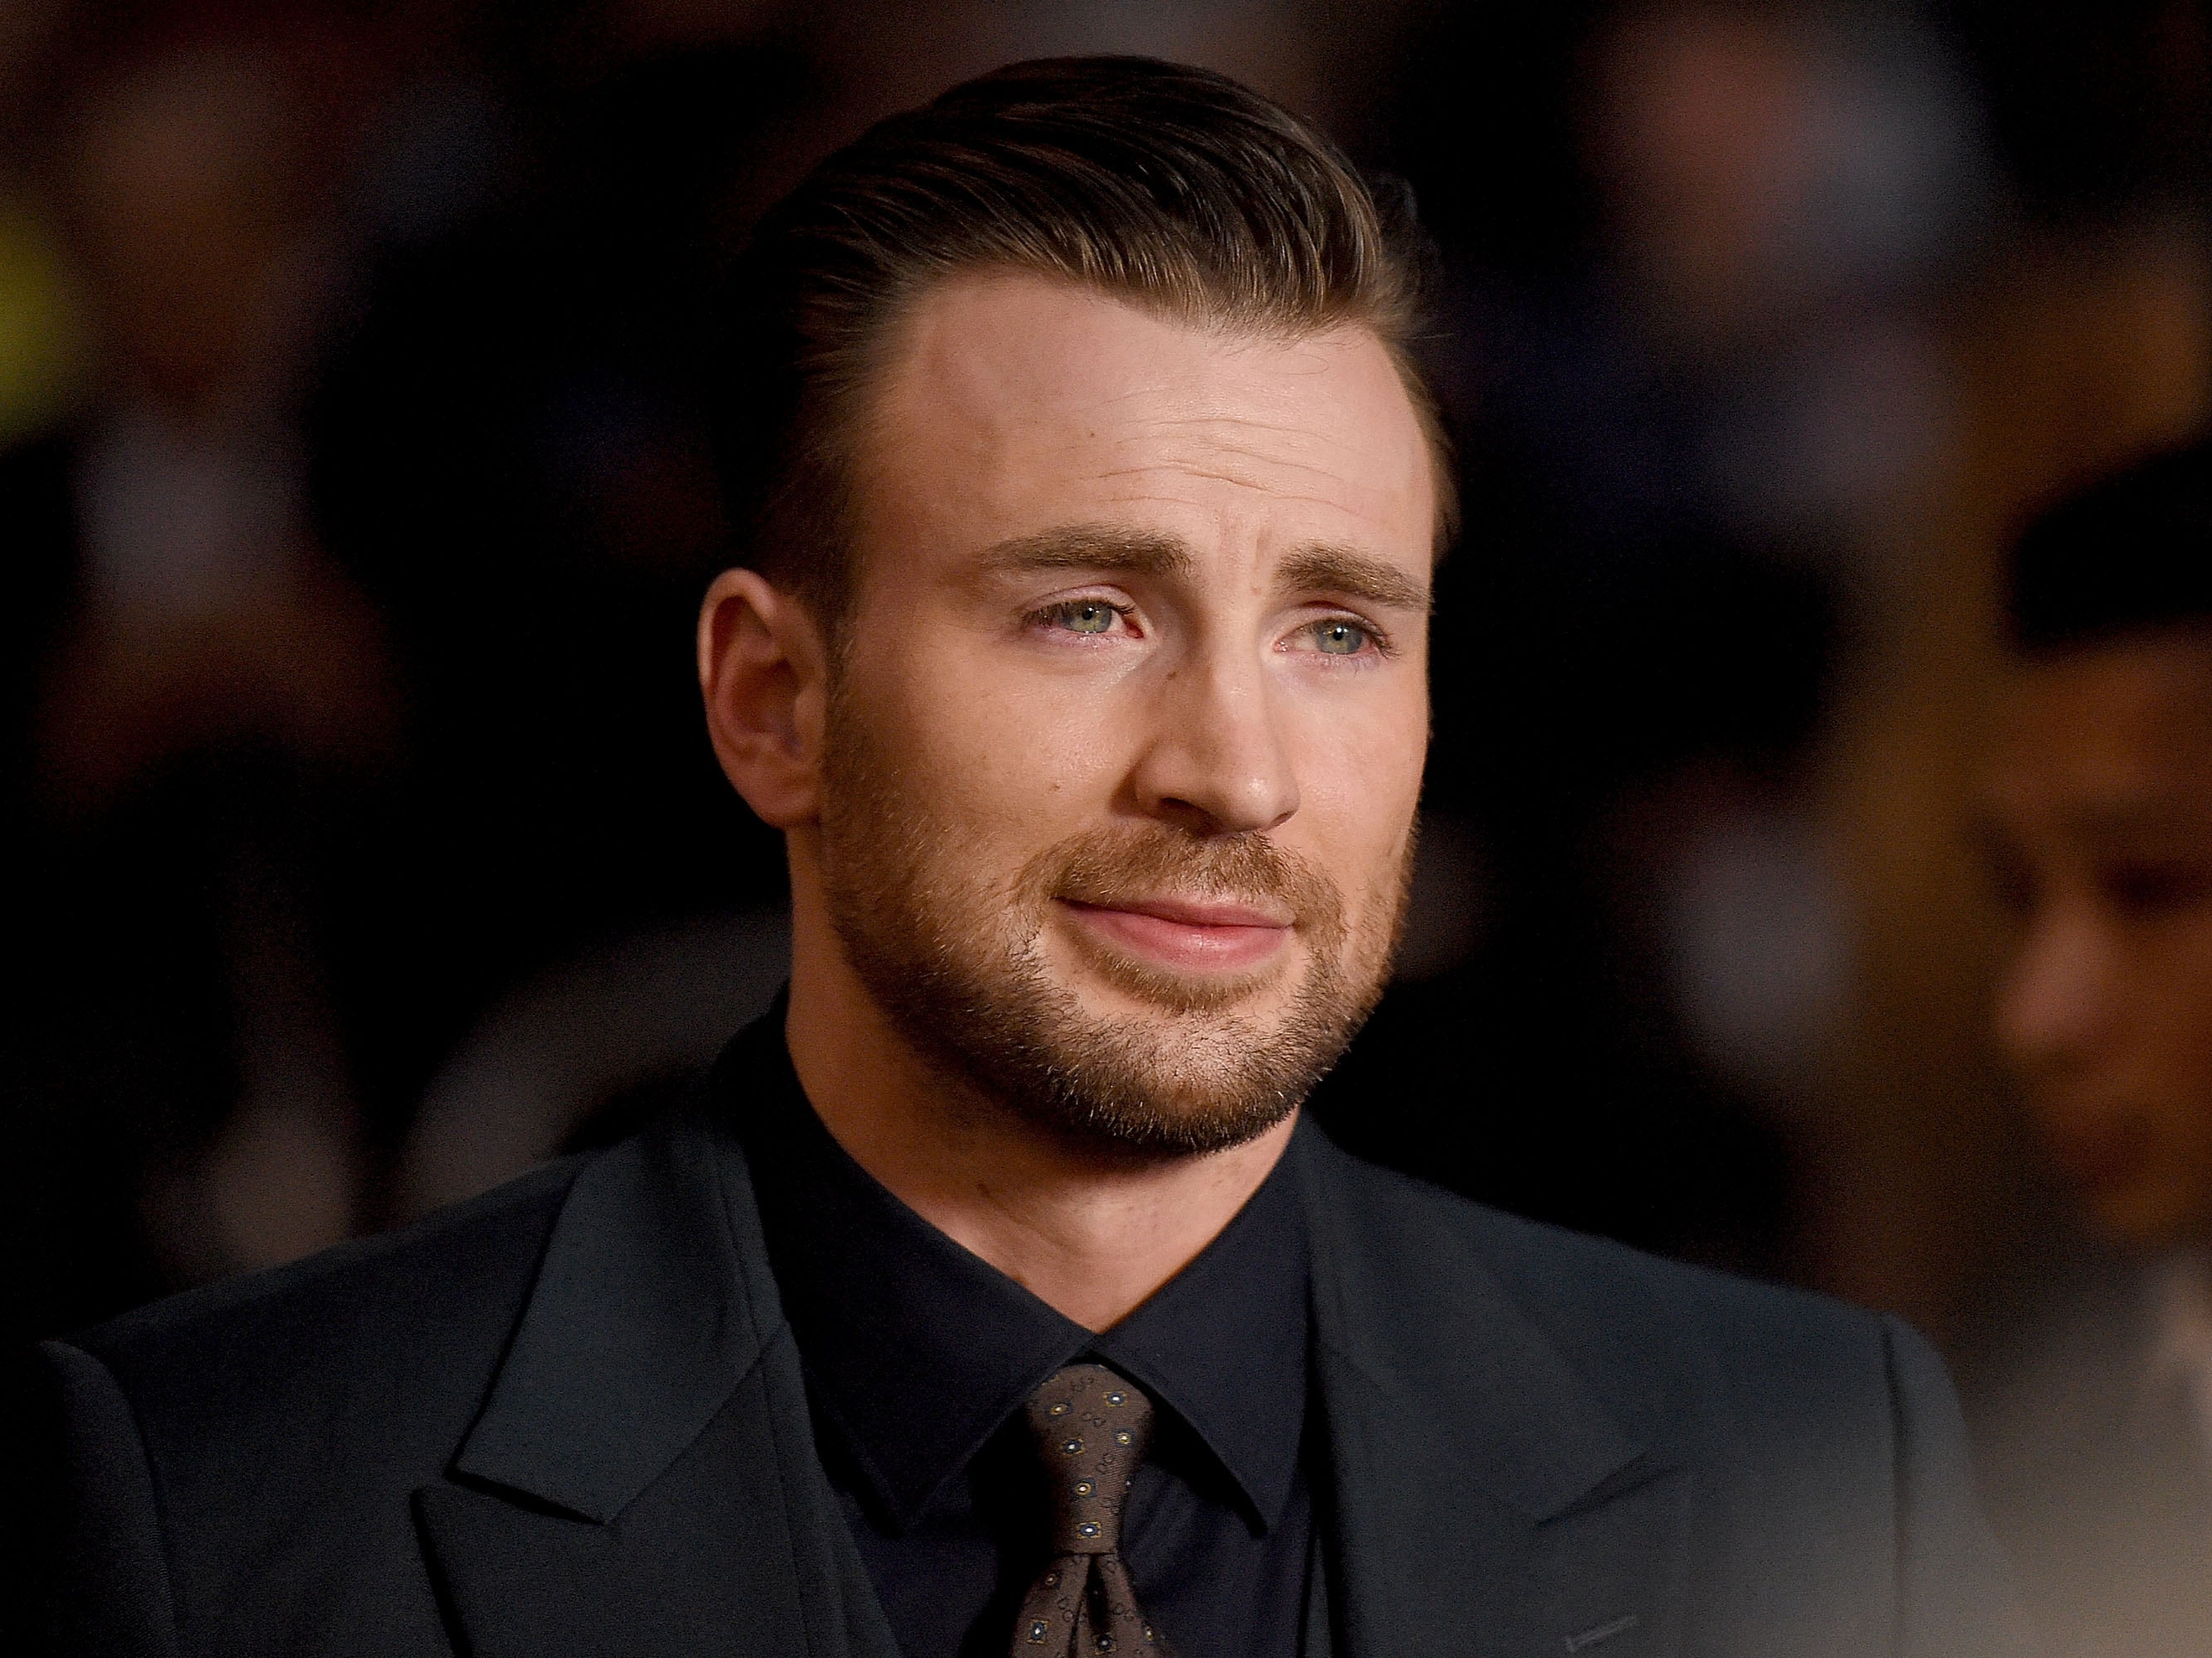 Chris Evans (Accidentally) Gave You Nudes. Now He Wants 